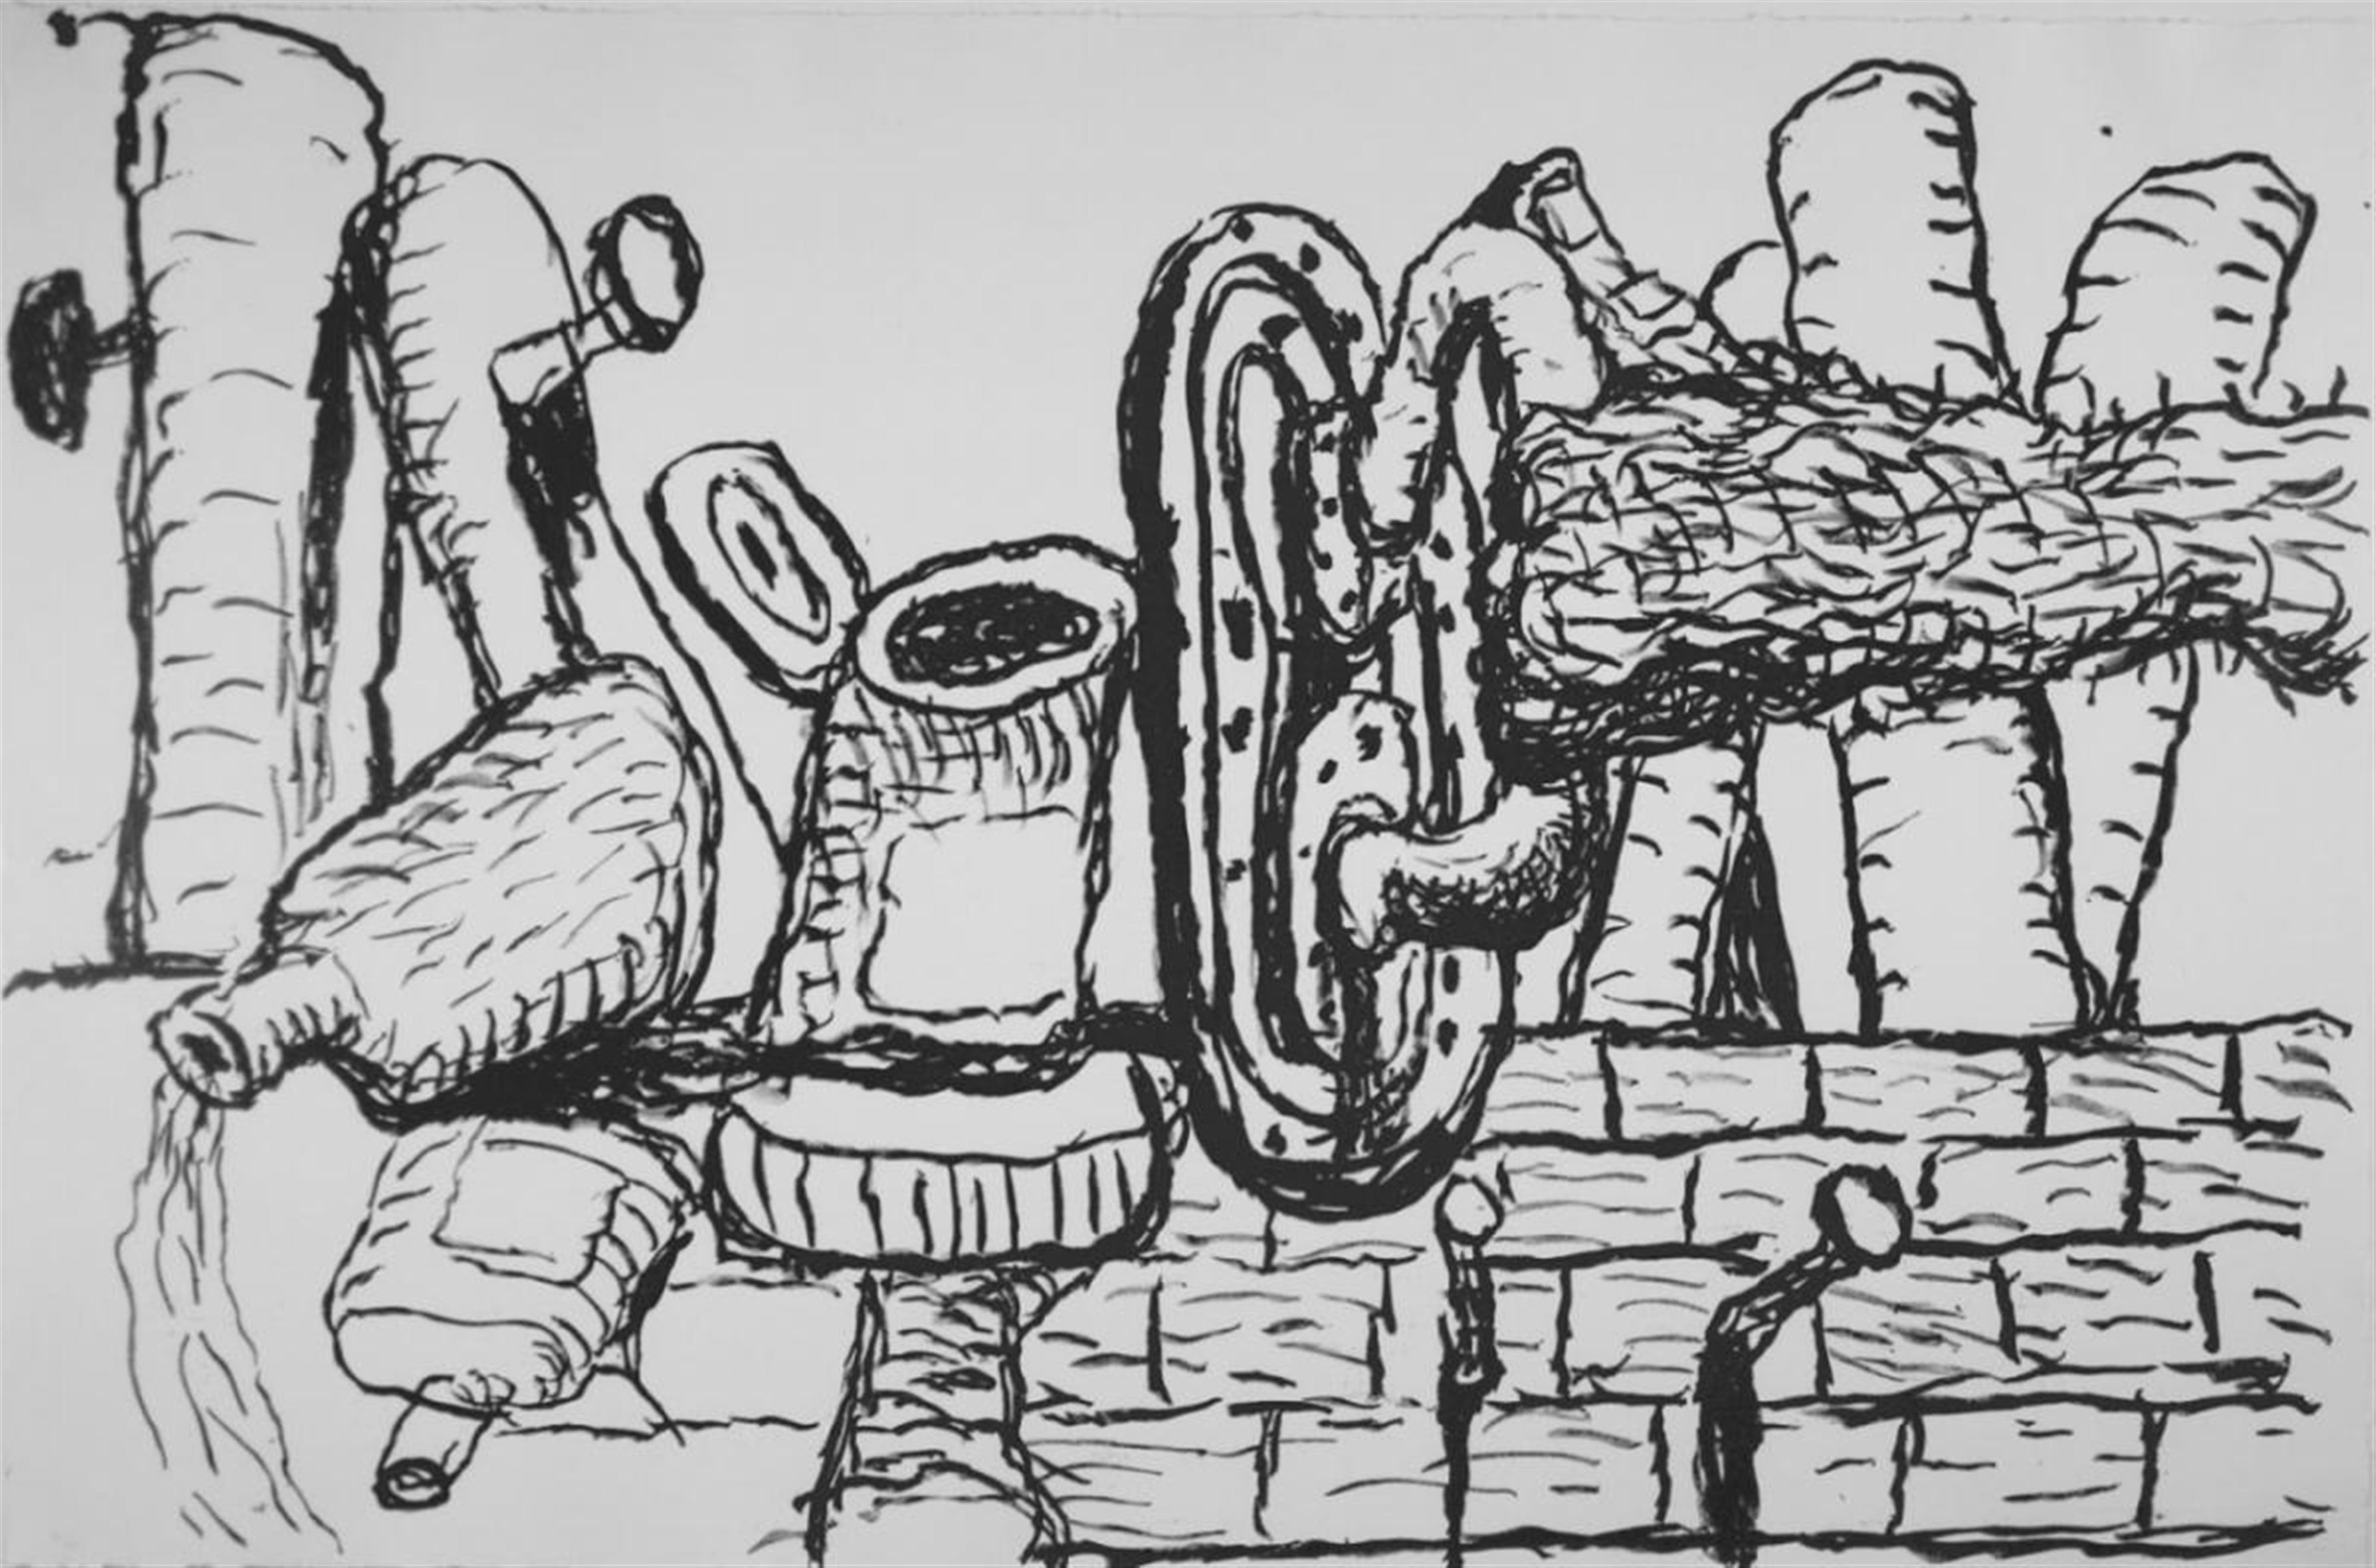 Philip Guston - Remains - image-1